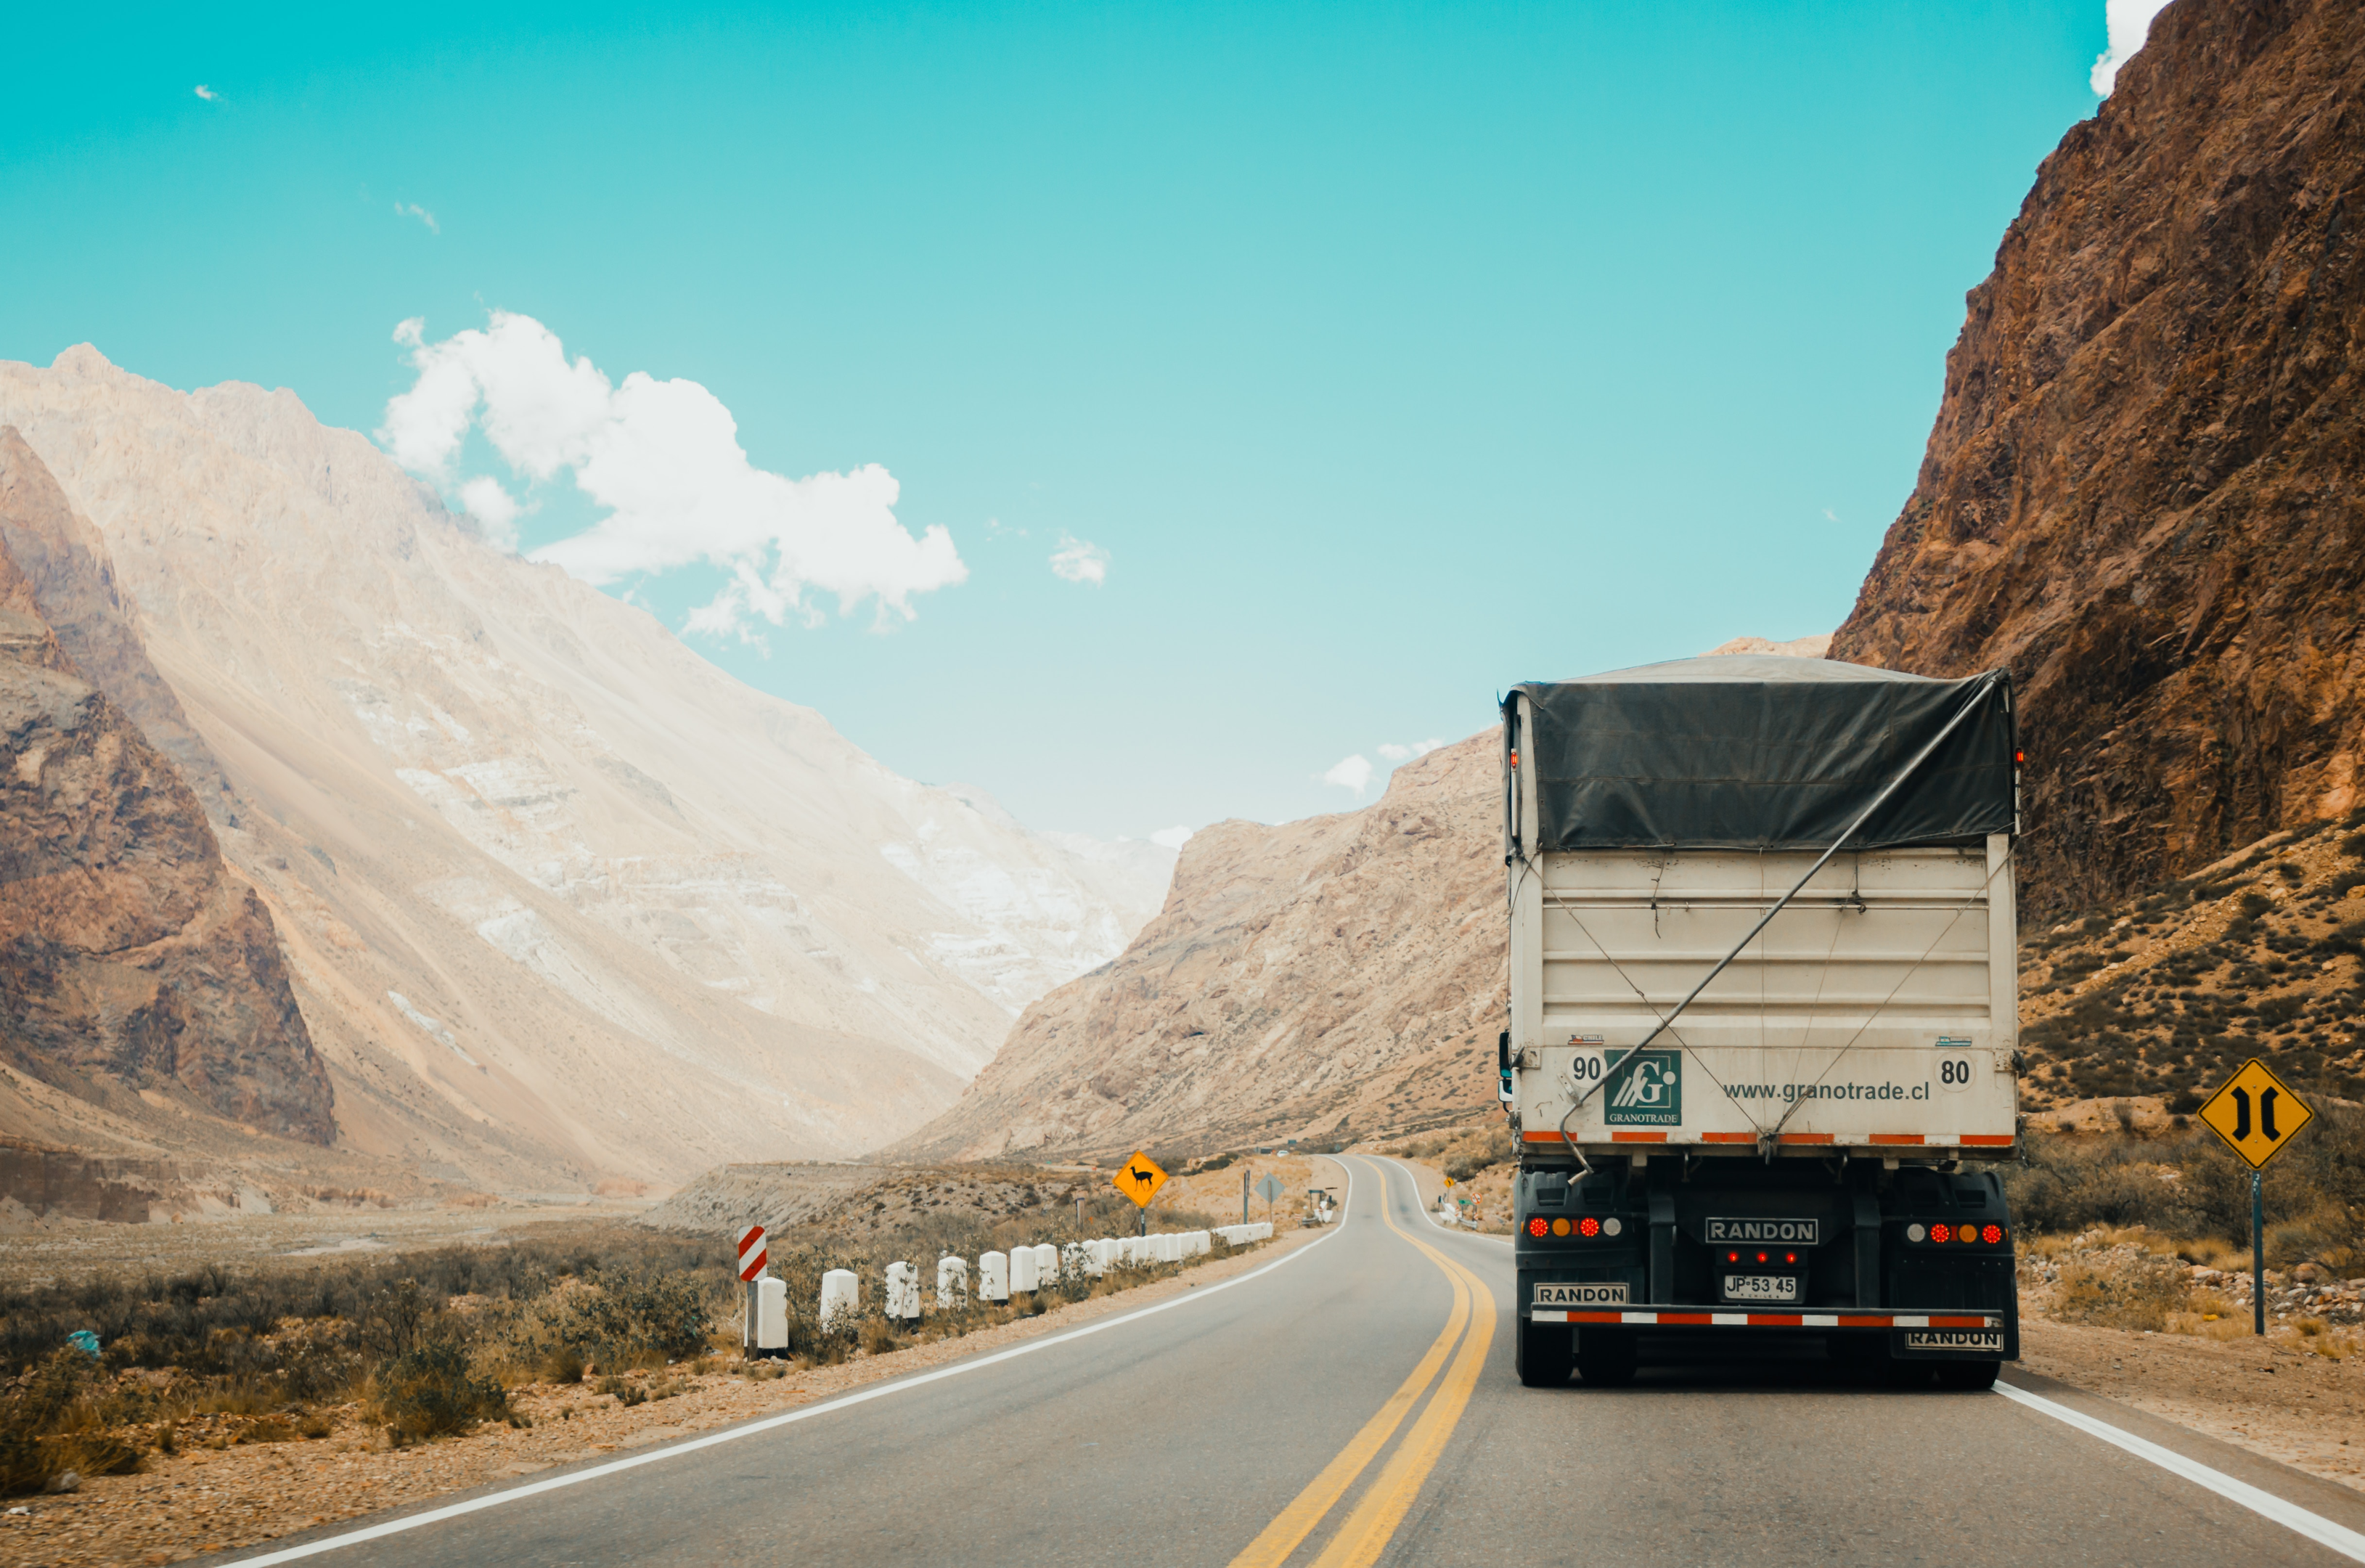 Poor truck maintenance and insecure loads are some unique dangers of a commercial vehicle.